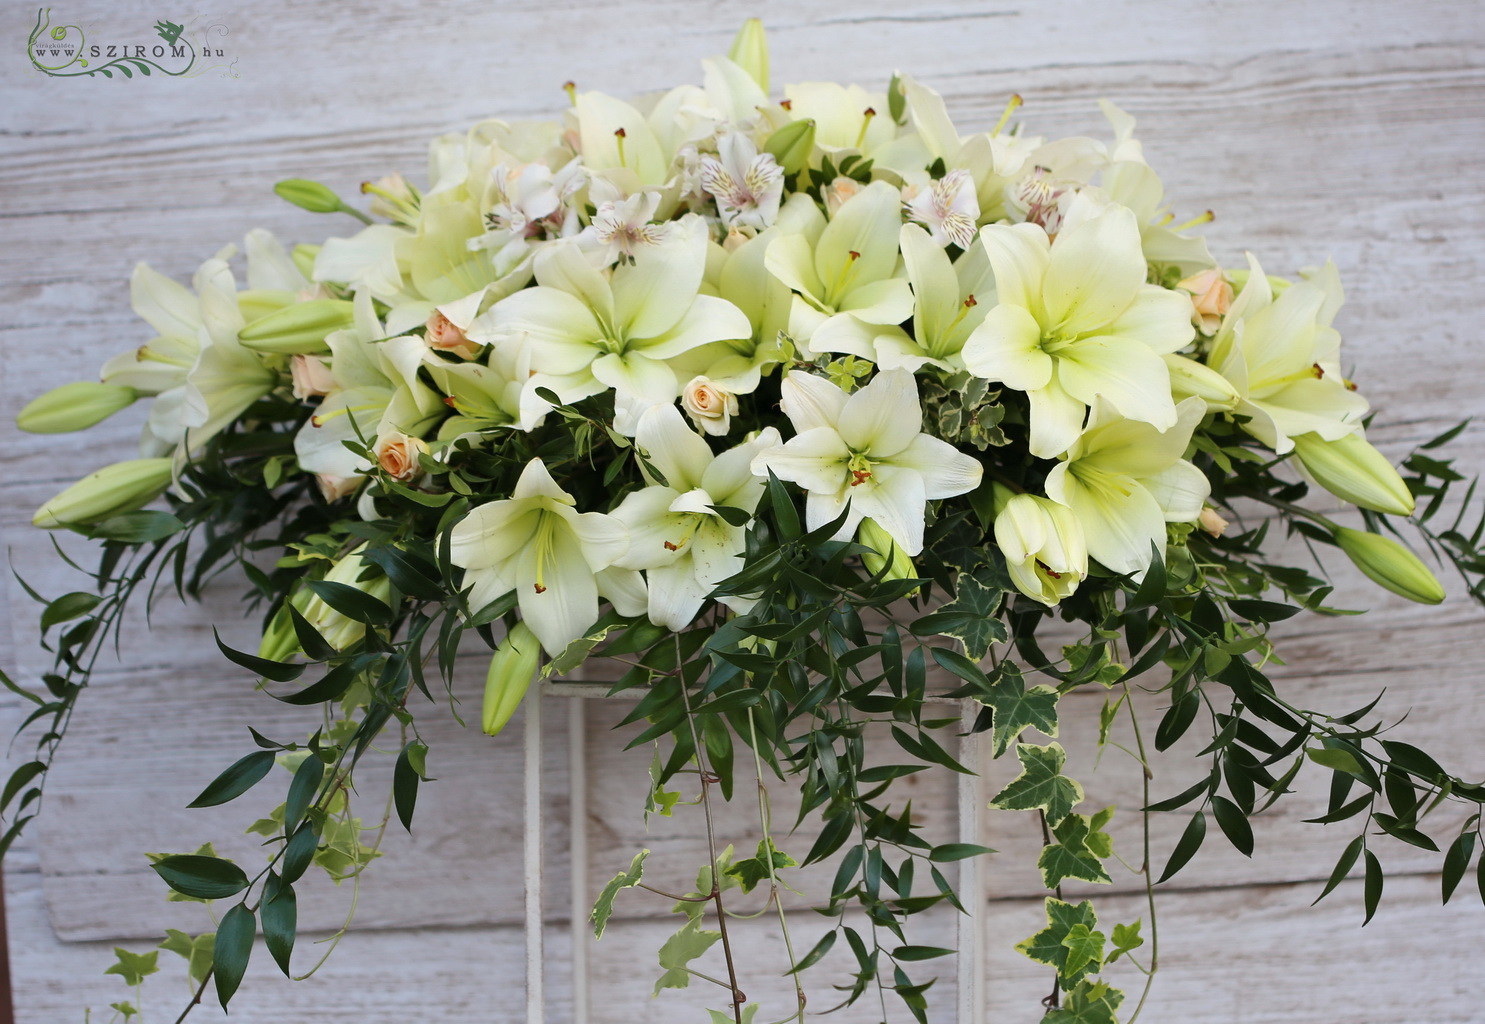 flower delivery Budapest - Main table centerpiece with cream asiatic lilies, wedding